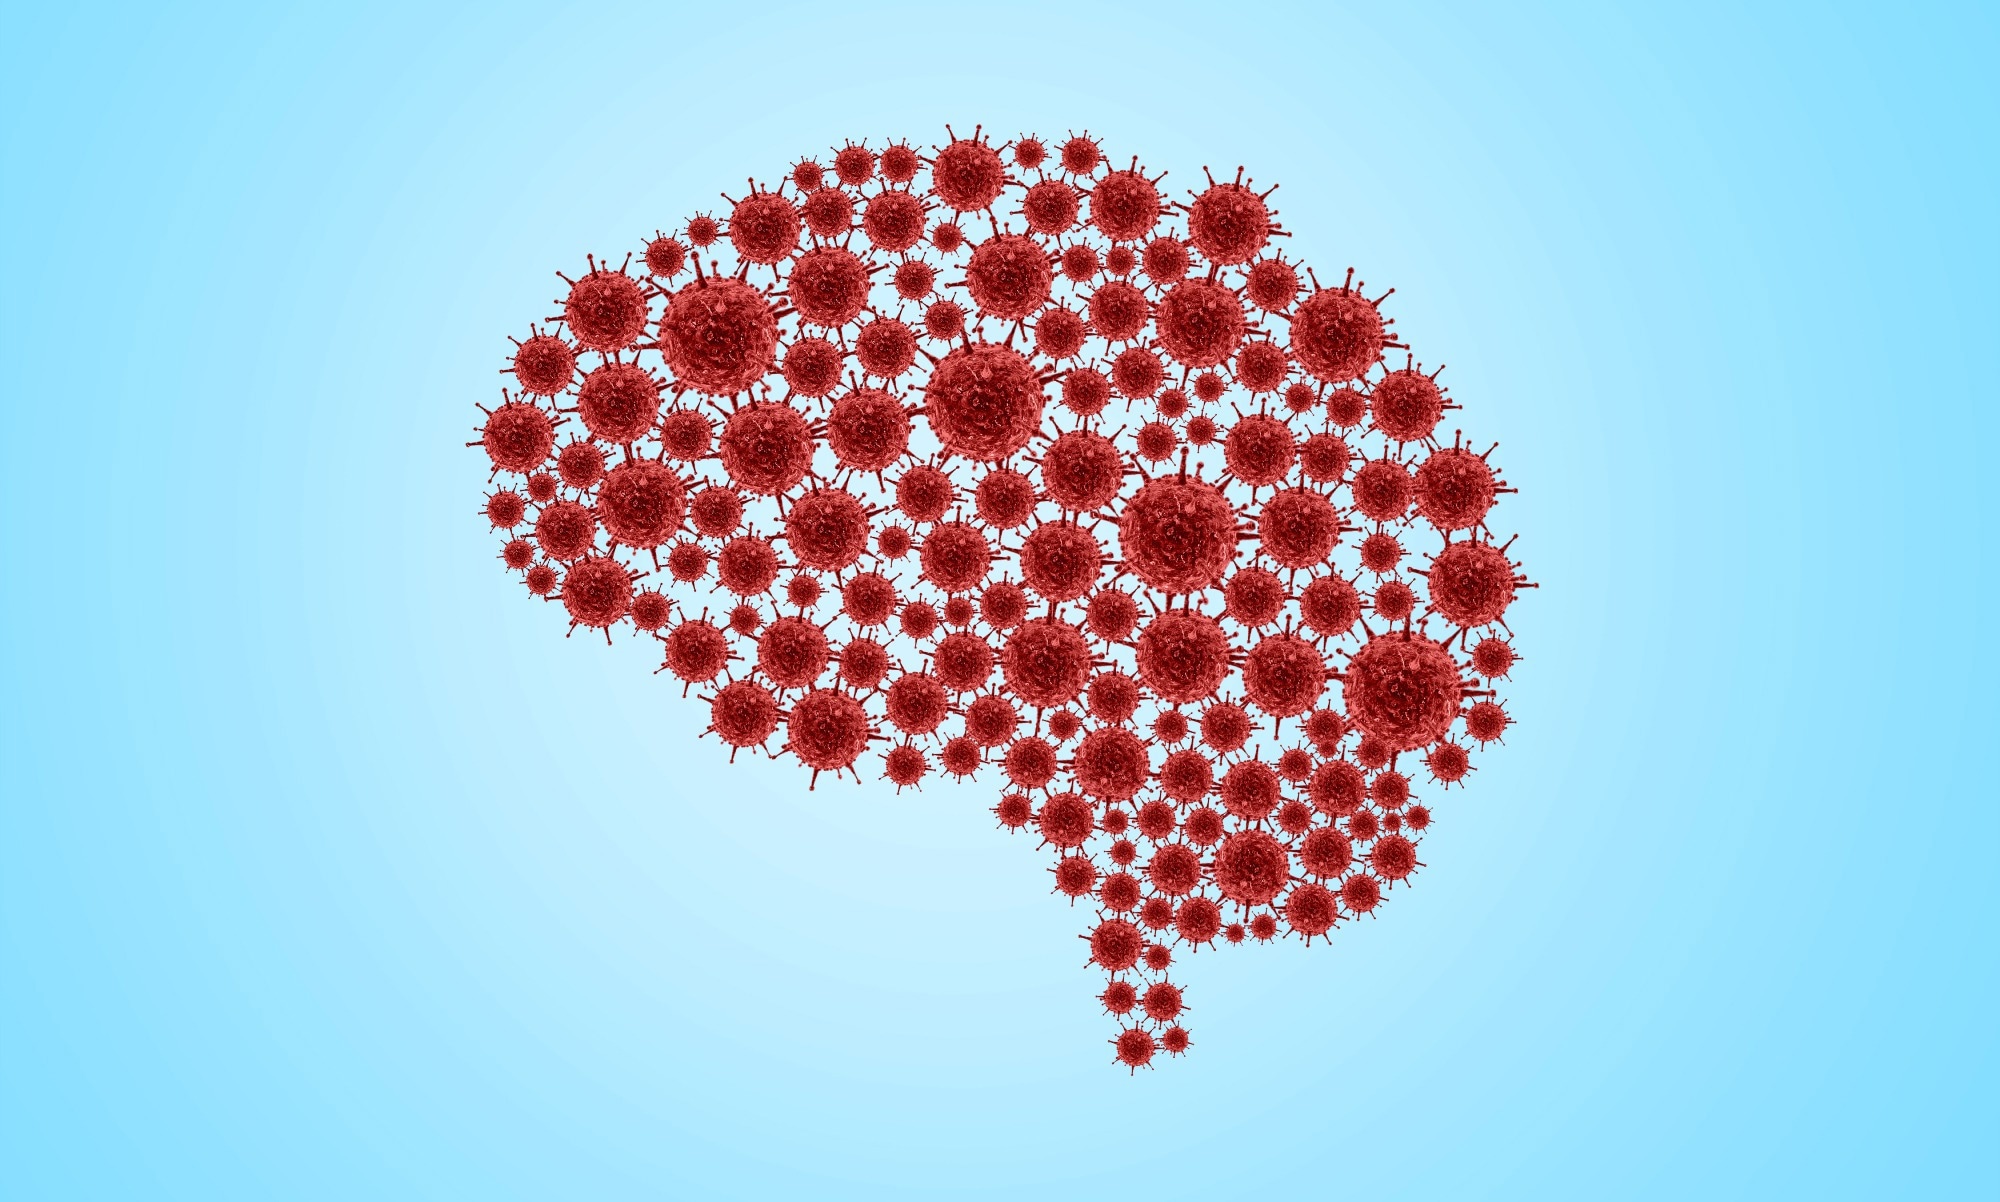 Study: Increased levels of circulating neurotoxic metabolites in patients with mild Covid19. Image Credit: DOERS / Shutterstock